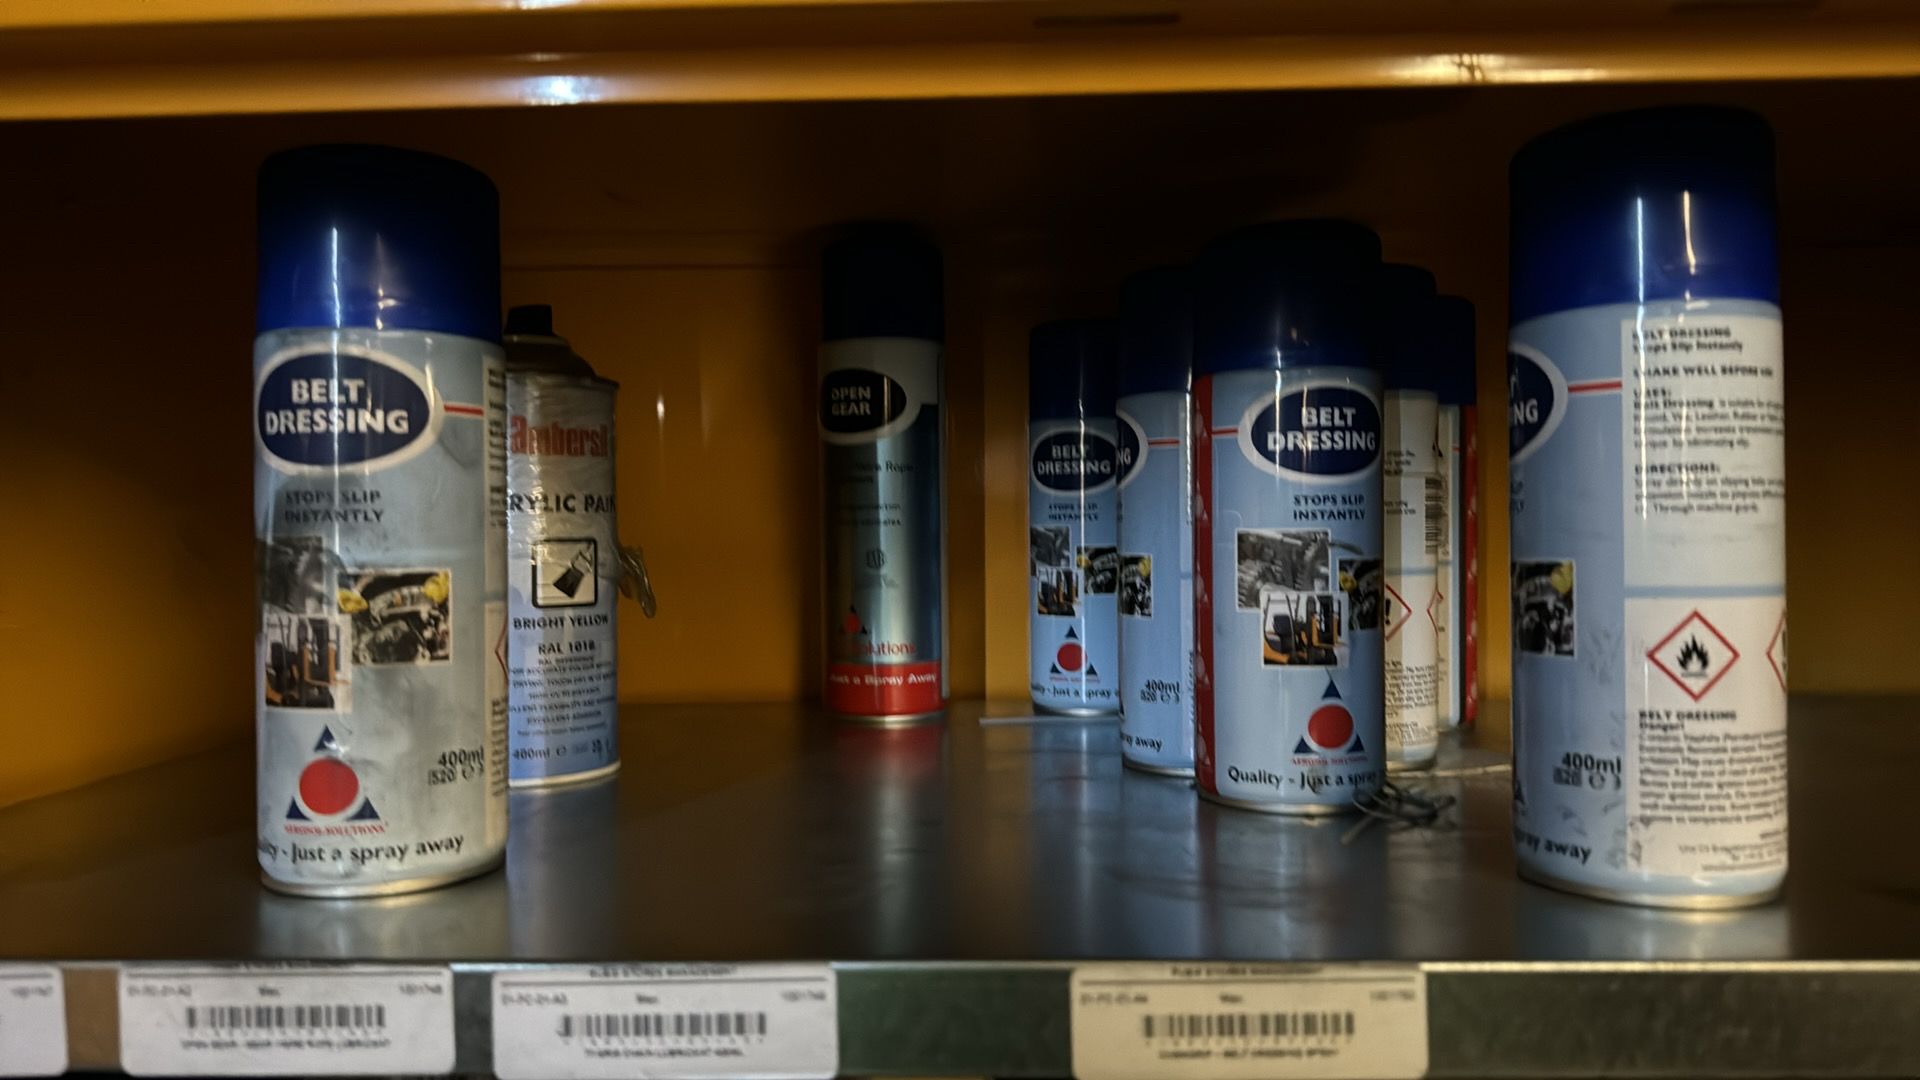 Cabinet & Contents Industrial Cleaning Products, Lubricants & Chemicals - Image 2 of 6